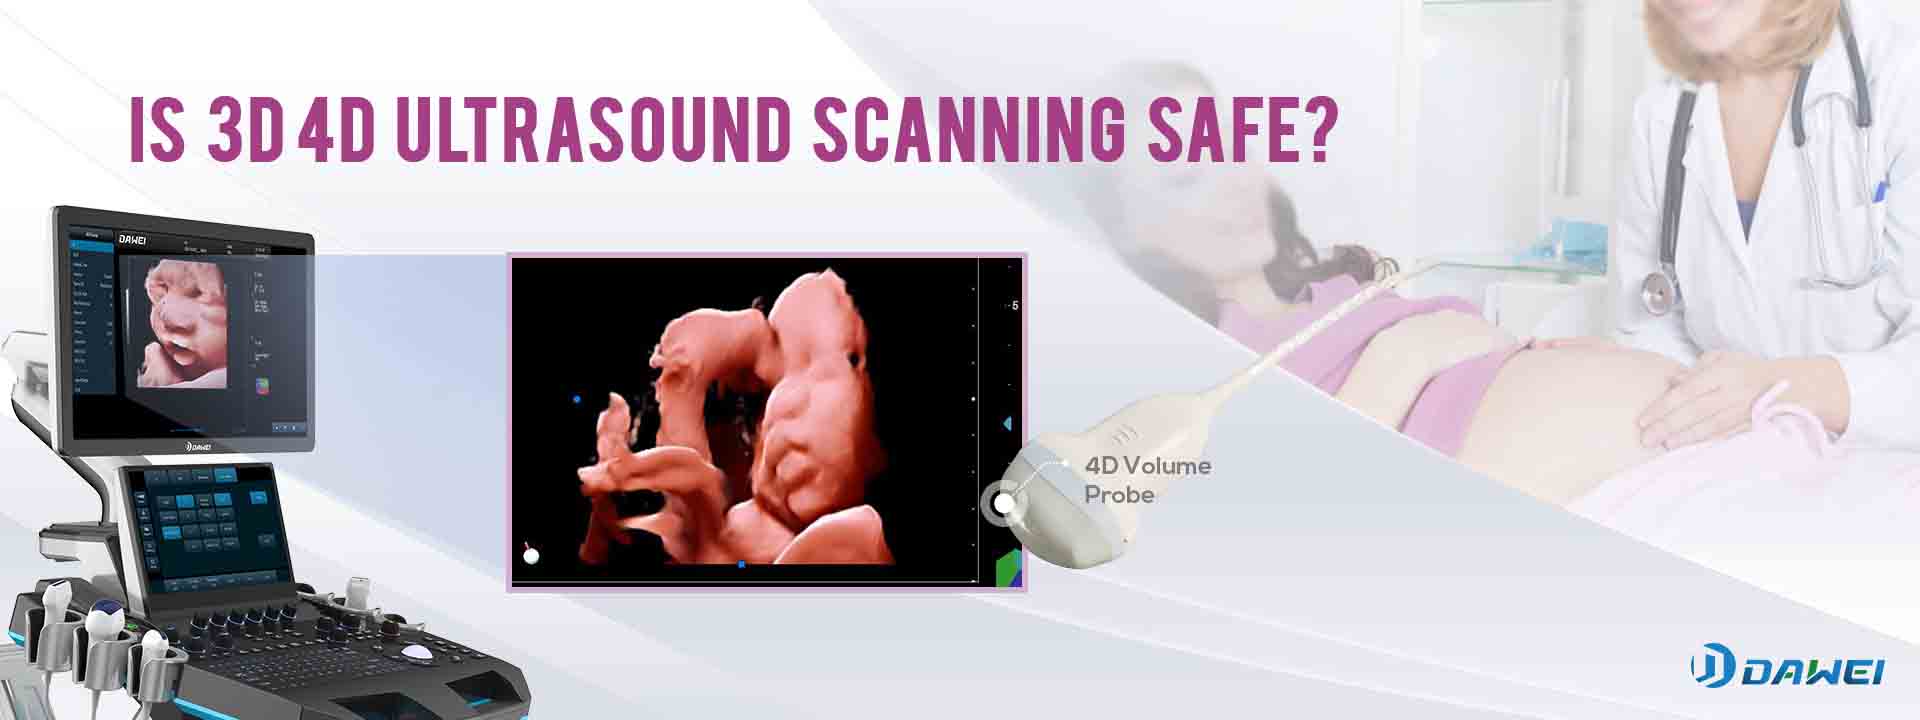 Is 3D4D ultrasound scanning safe in Obstetrics and Gynecology?